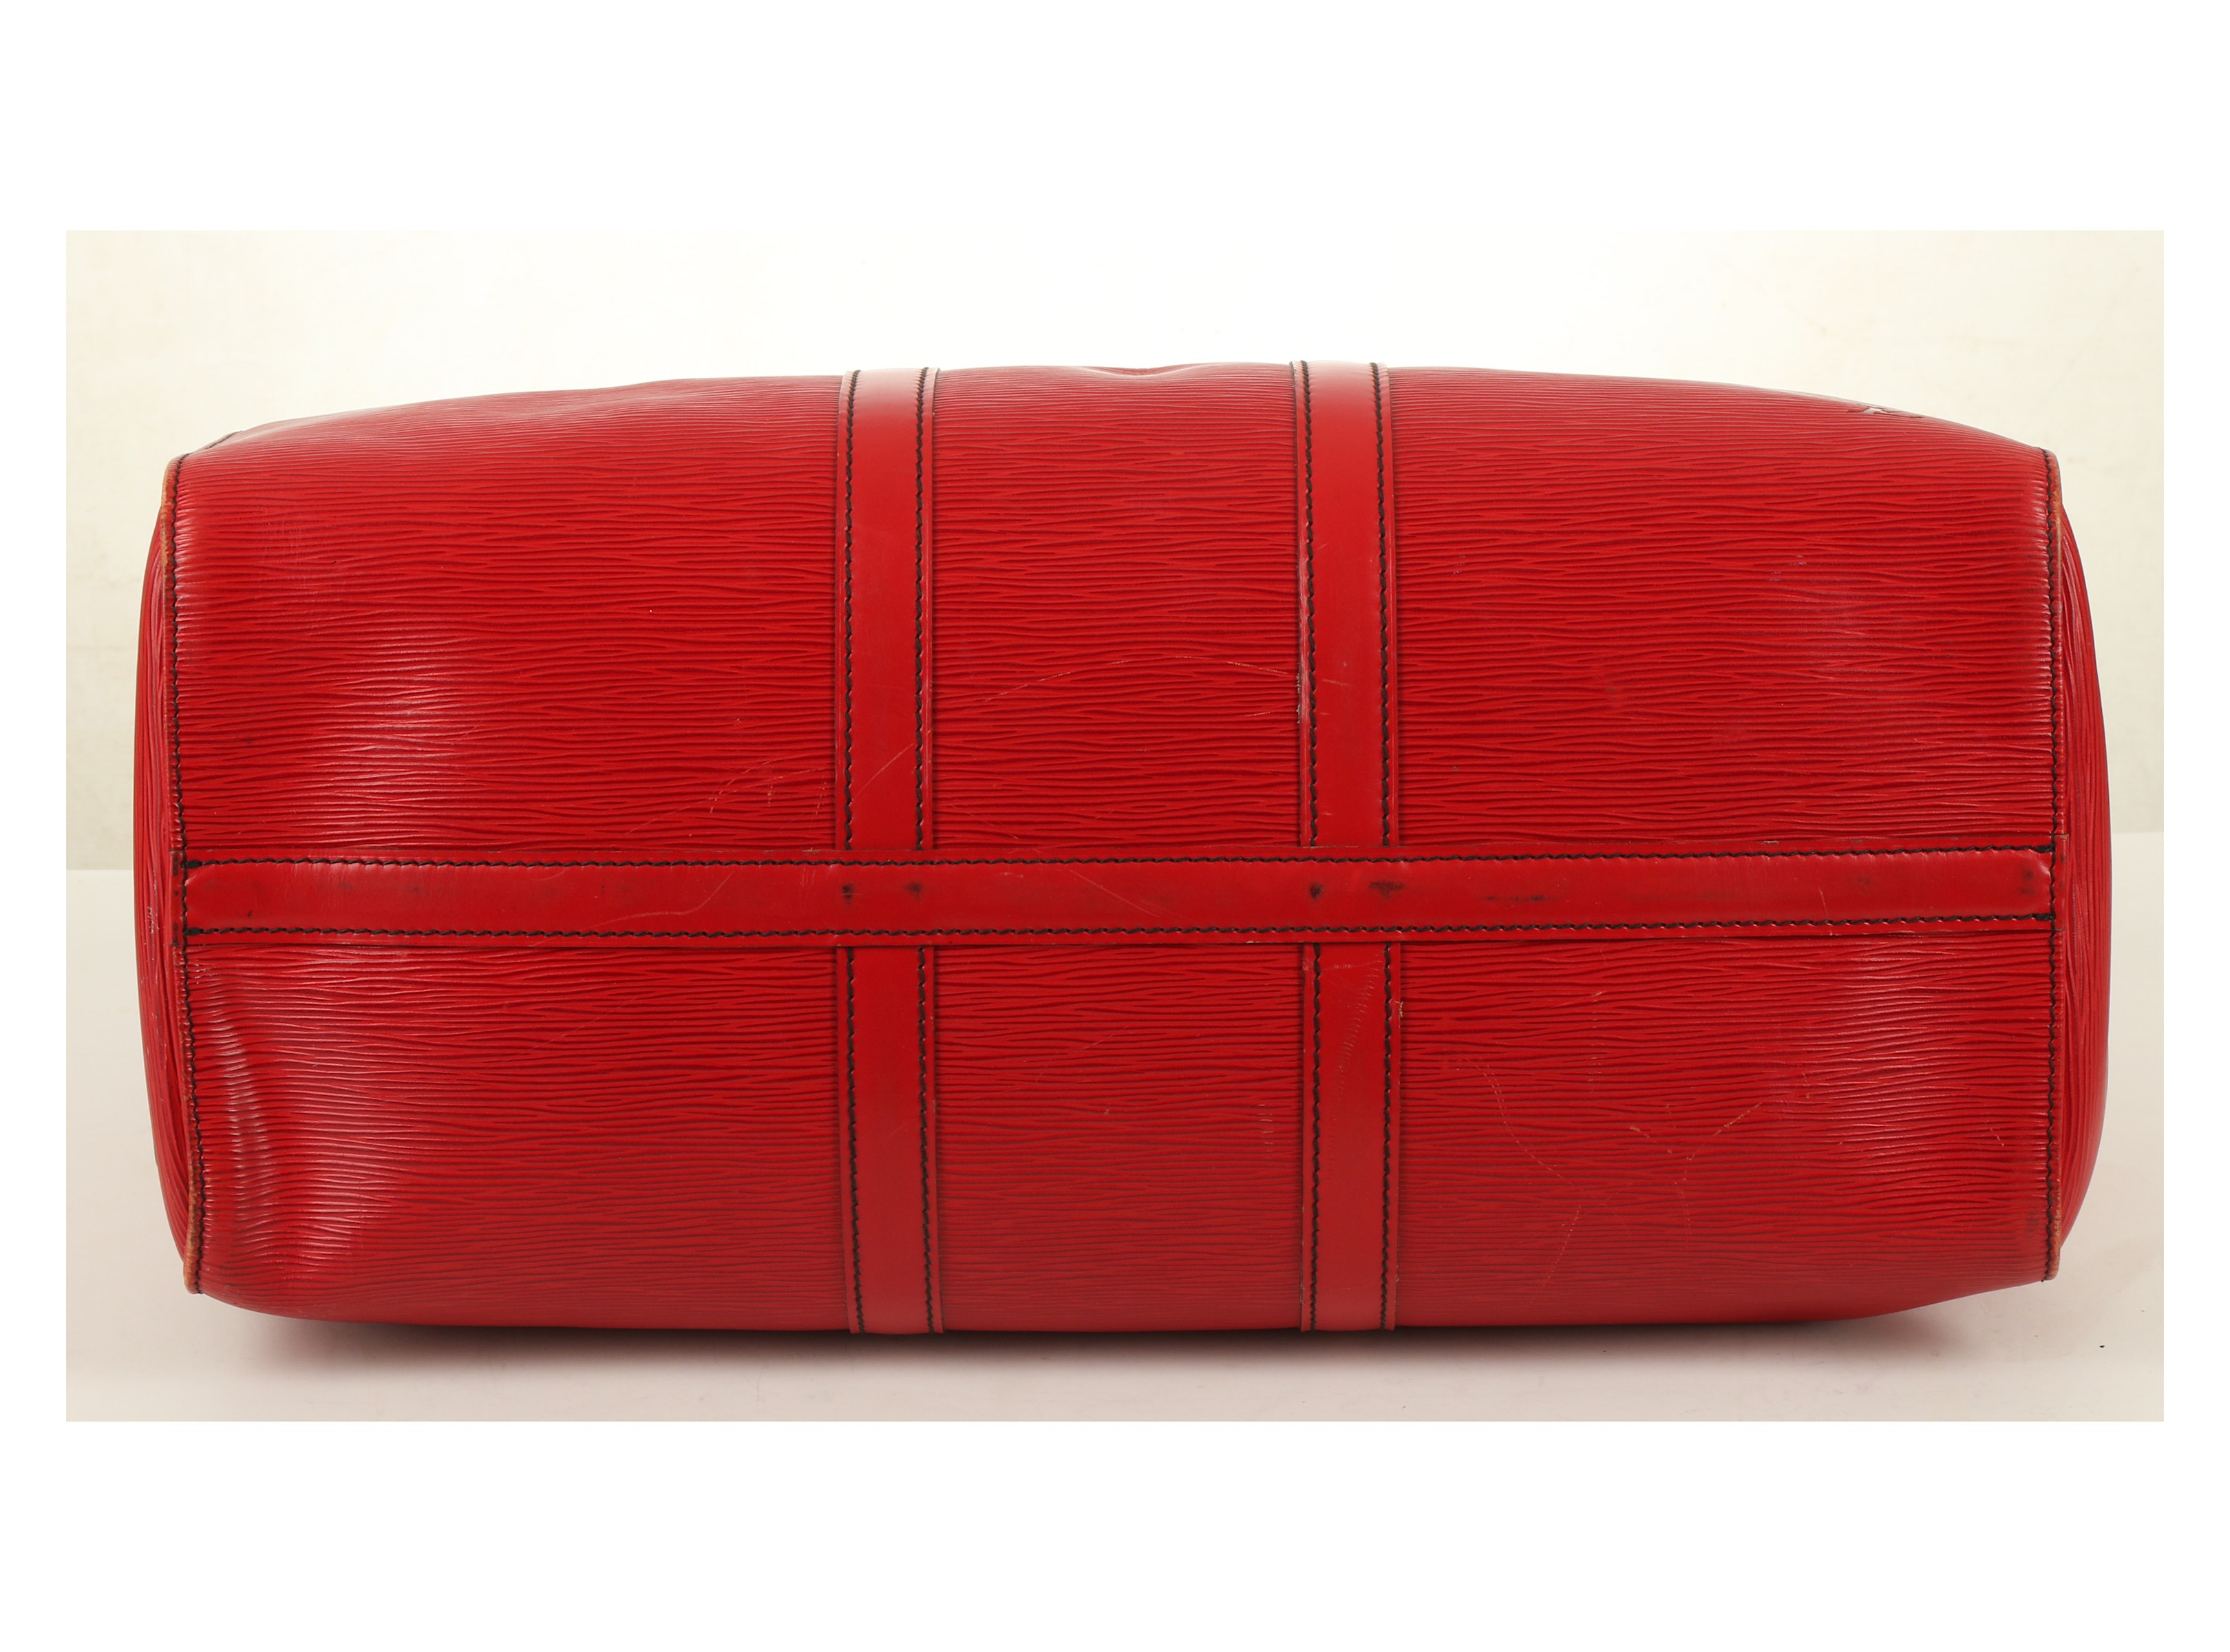 Louis Vuitton Red Epi Keepall 45, c. 1991, epi leather with contrast stitching and gold tone - Image 5 of 5